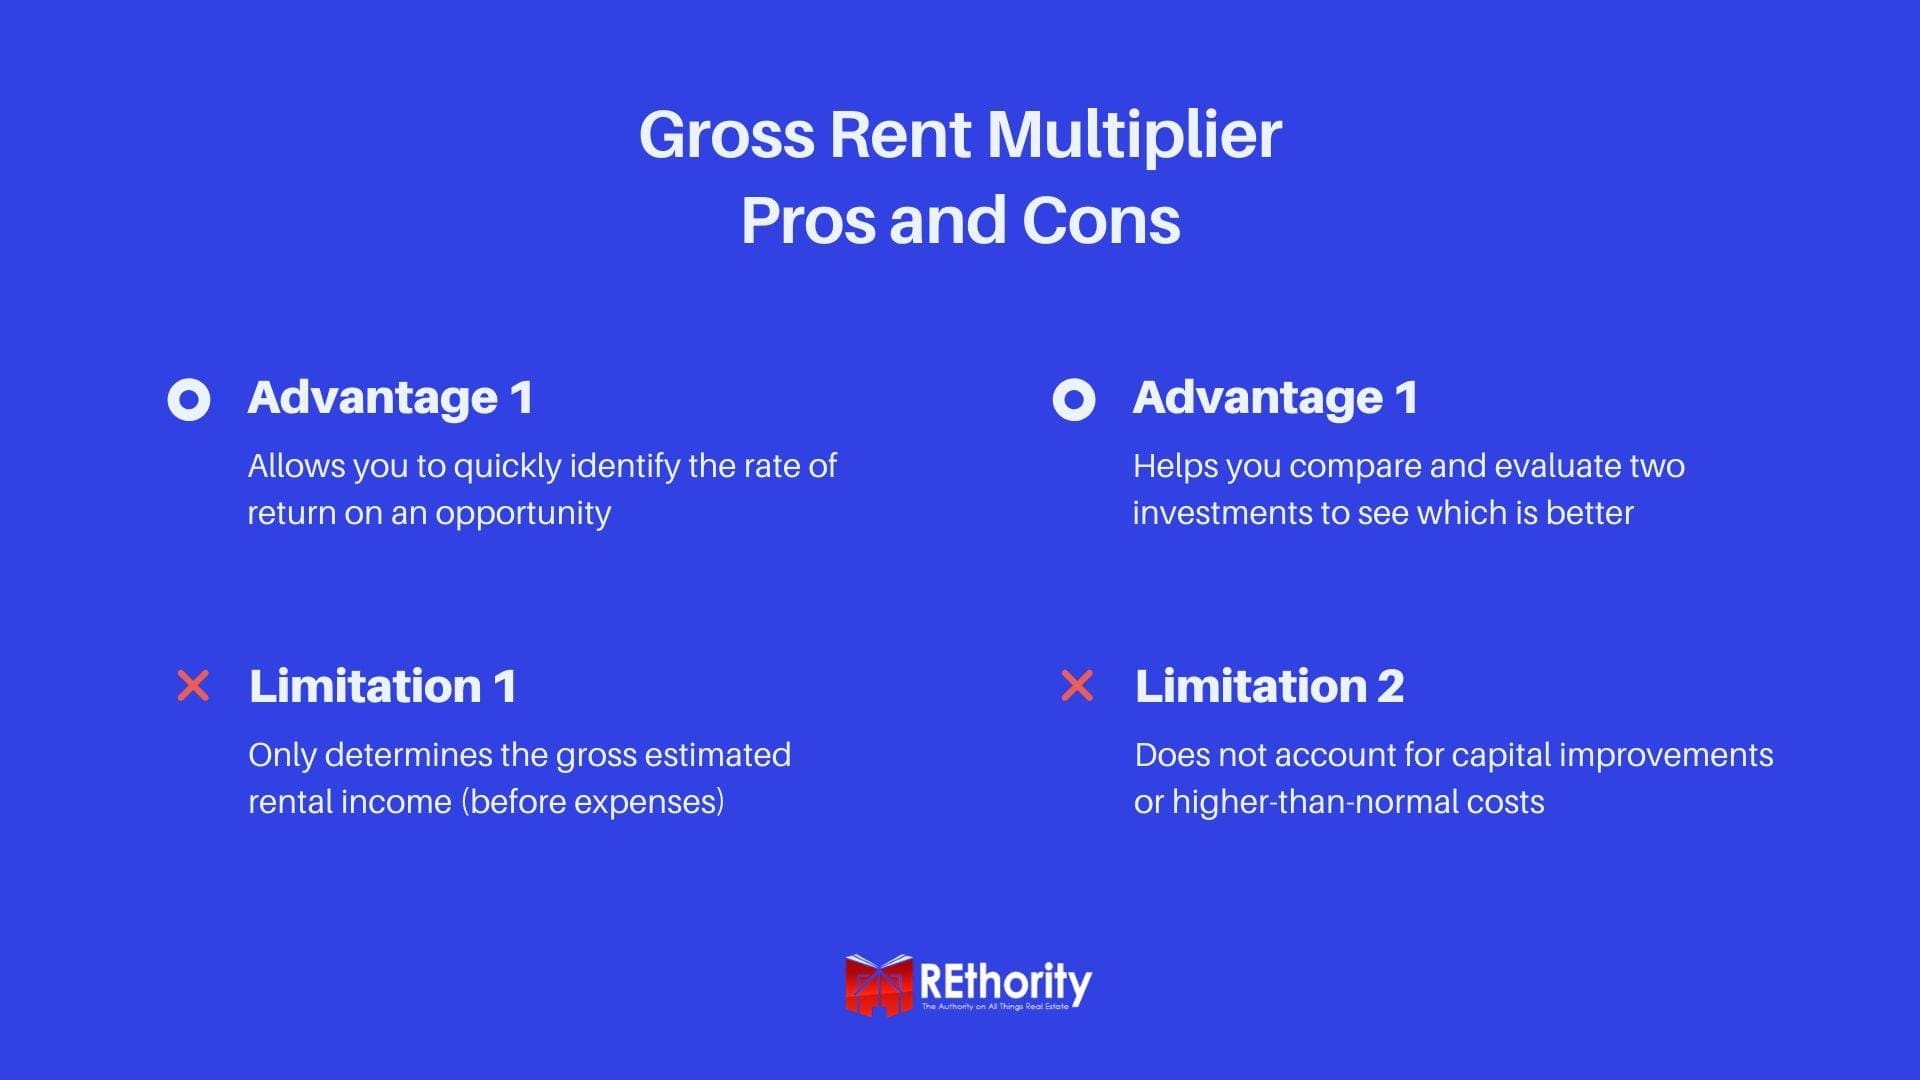 Gross rent multiplier pros and cons